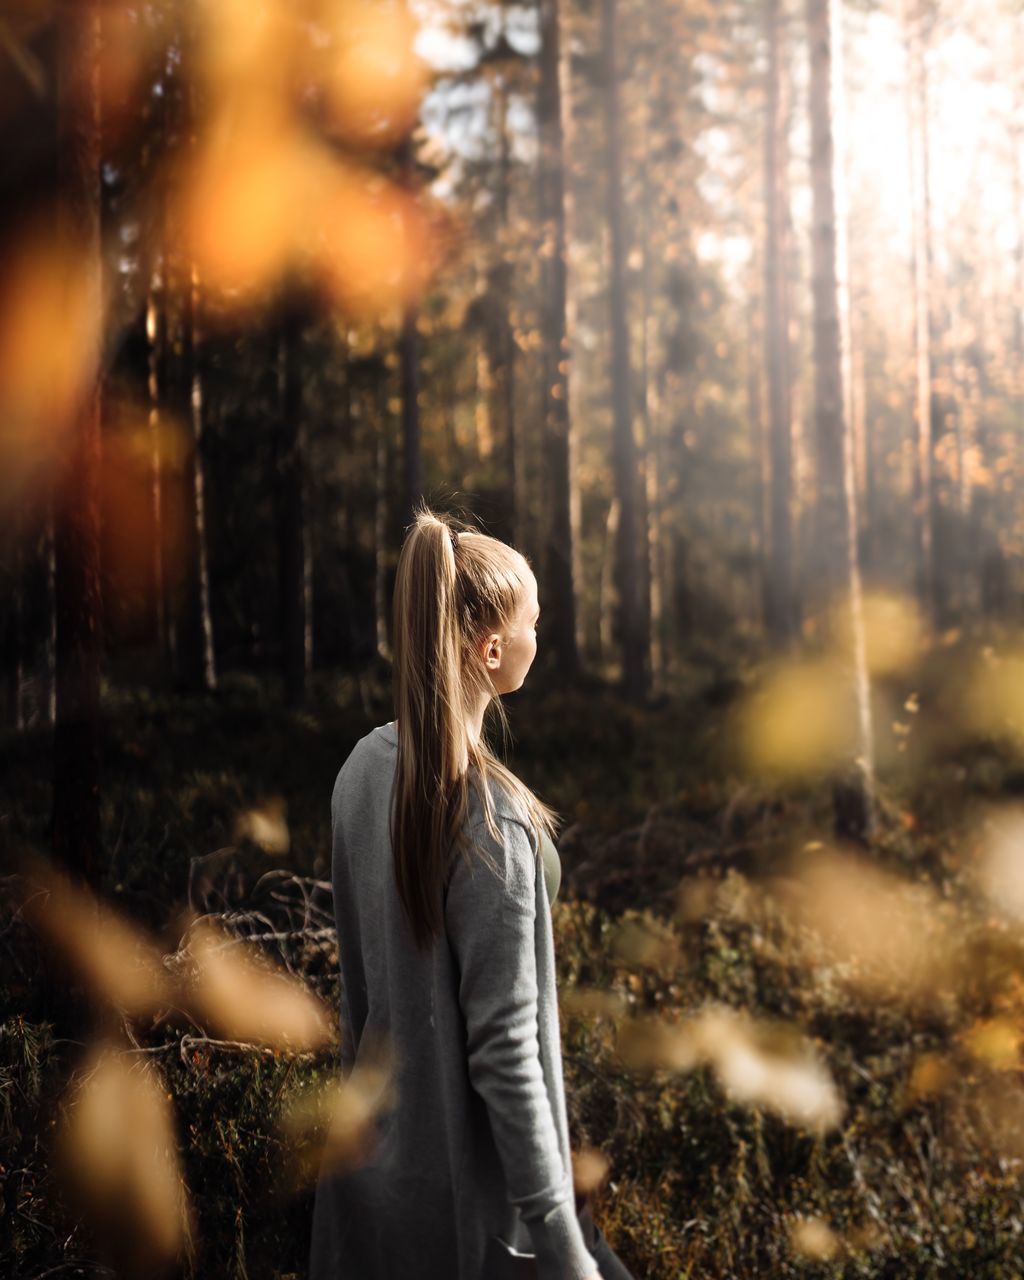 Rear view of young woman standing in forest